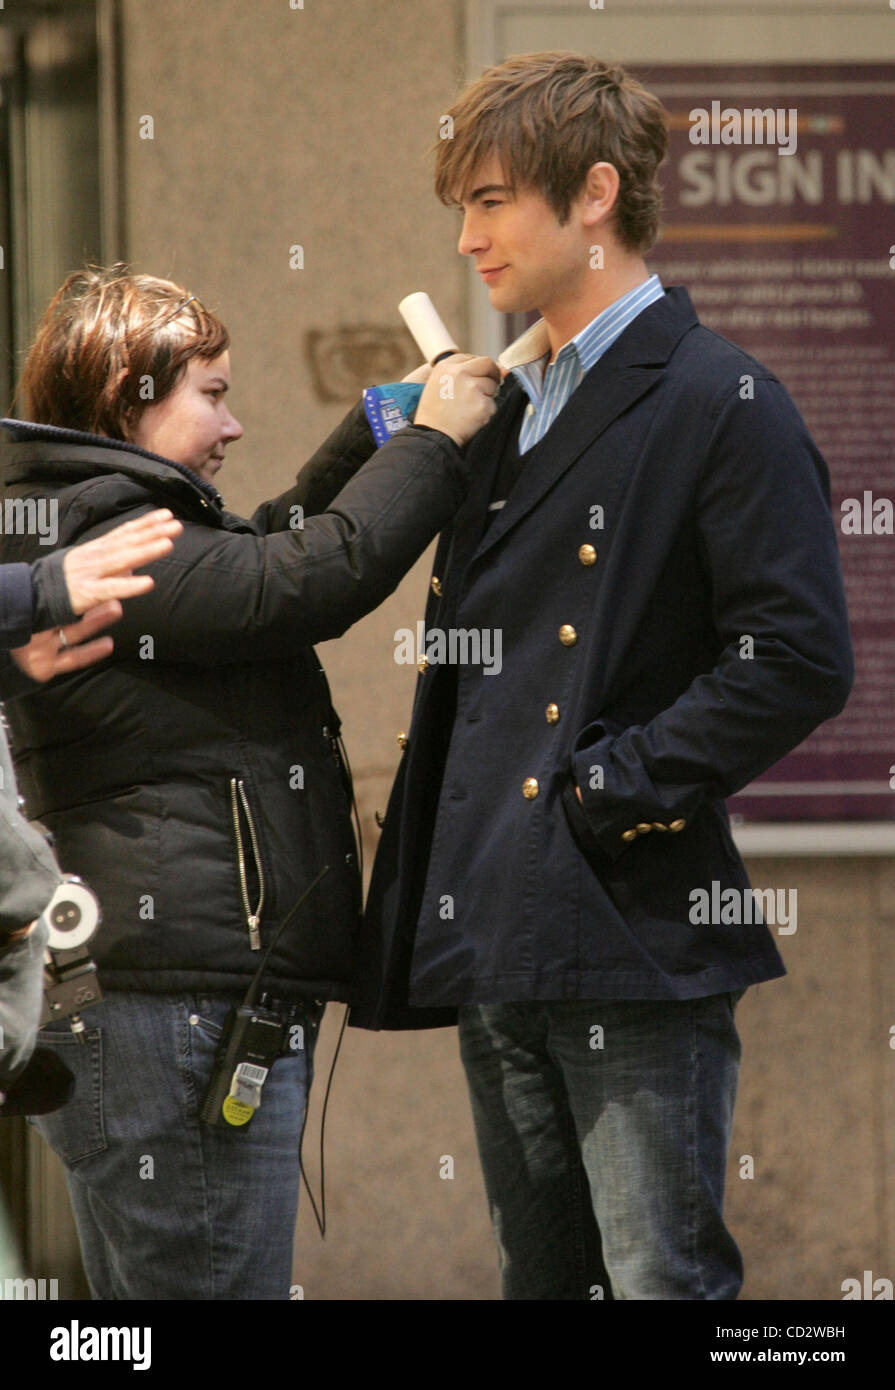 Mar 24, 2008 - New York, NY, USA - Actor CHACE CRAWFORD on the film set of the TV series 'Gossip Girl' held on the Upper East Side. (Credit Image: © Nancy Kaszerman/ZUMA Press) Stock Photo